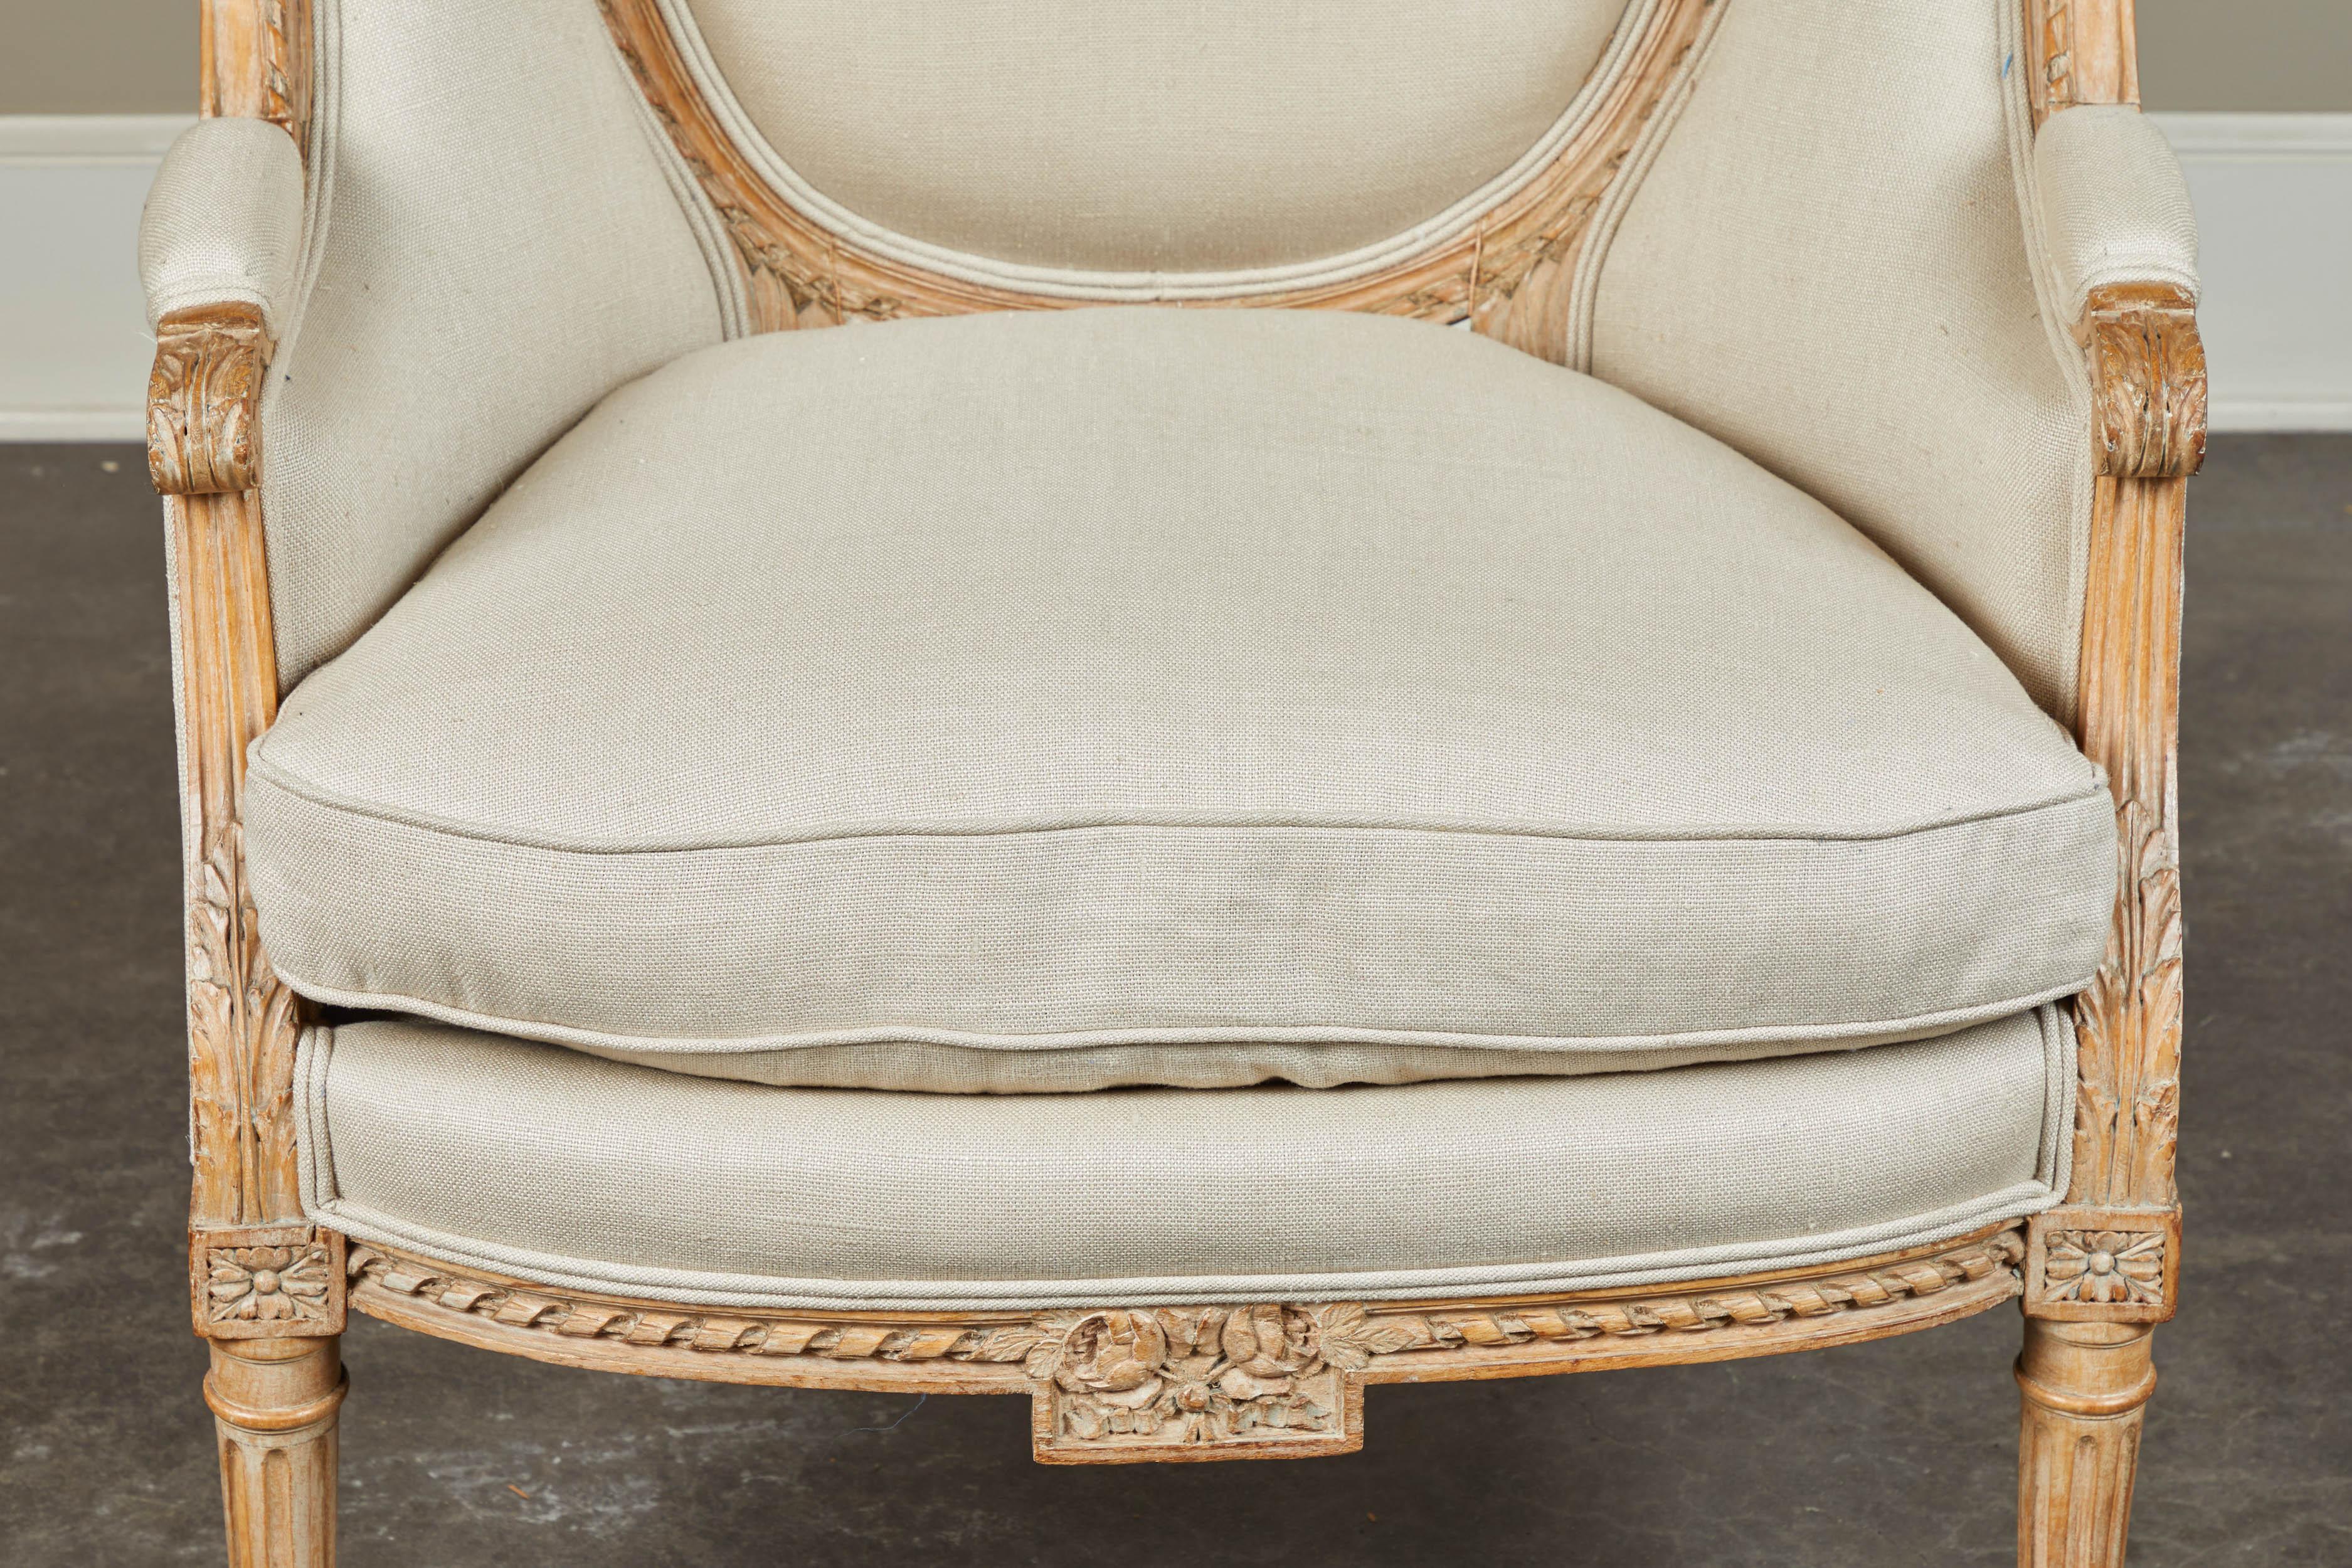 19th Century French Carved Chair with Beige Upholstery For Sale 8